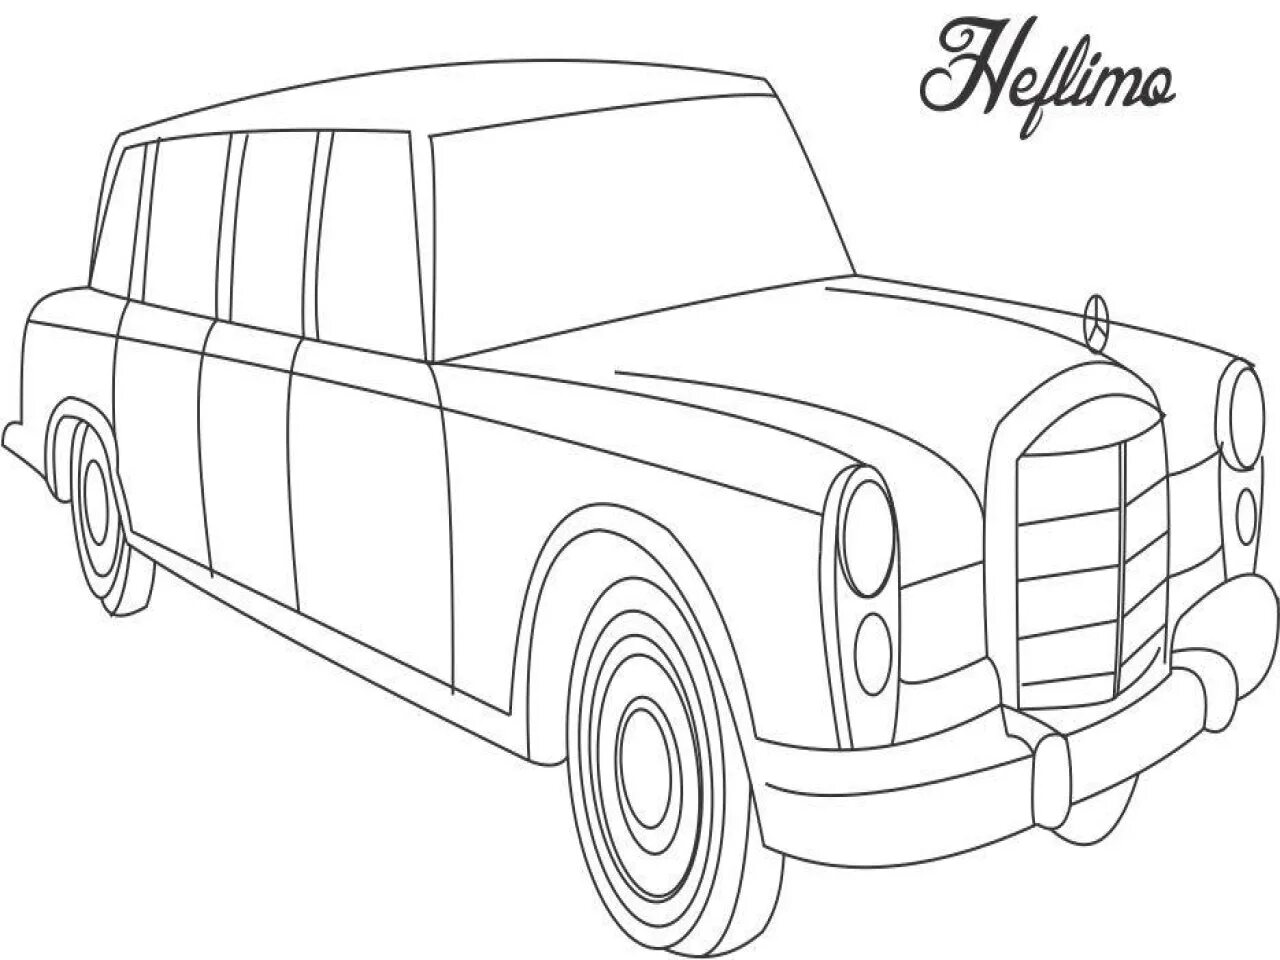 Glittering limousine coloring book for kids